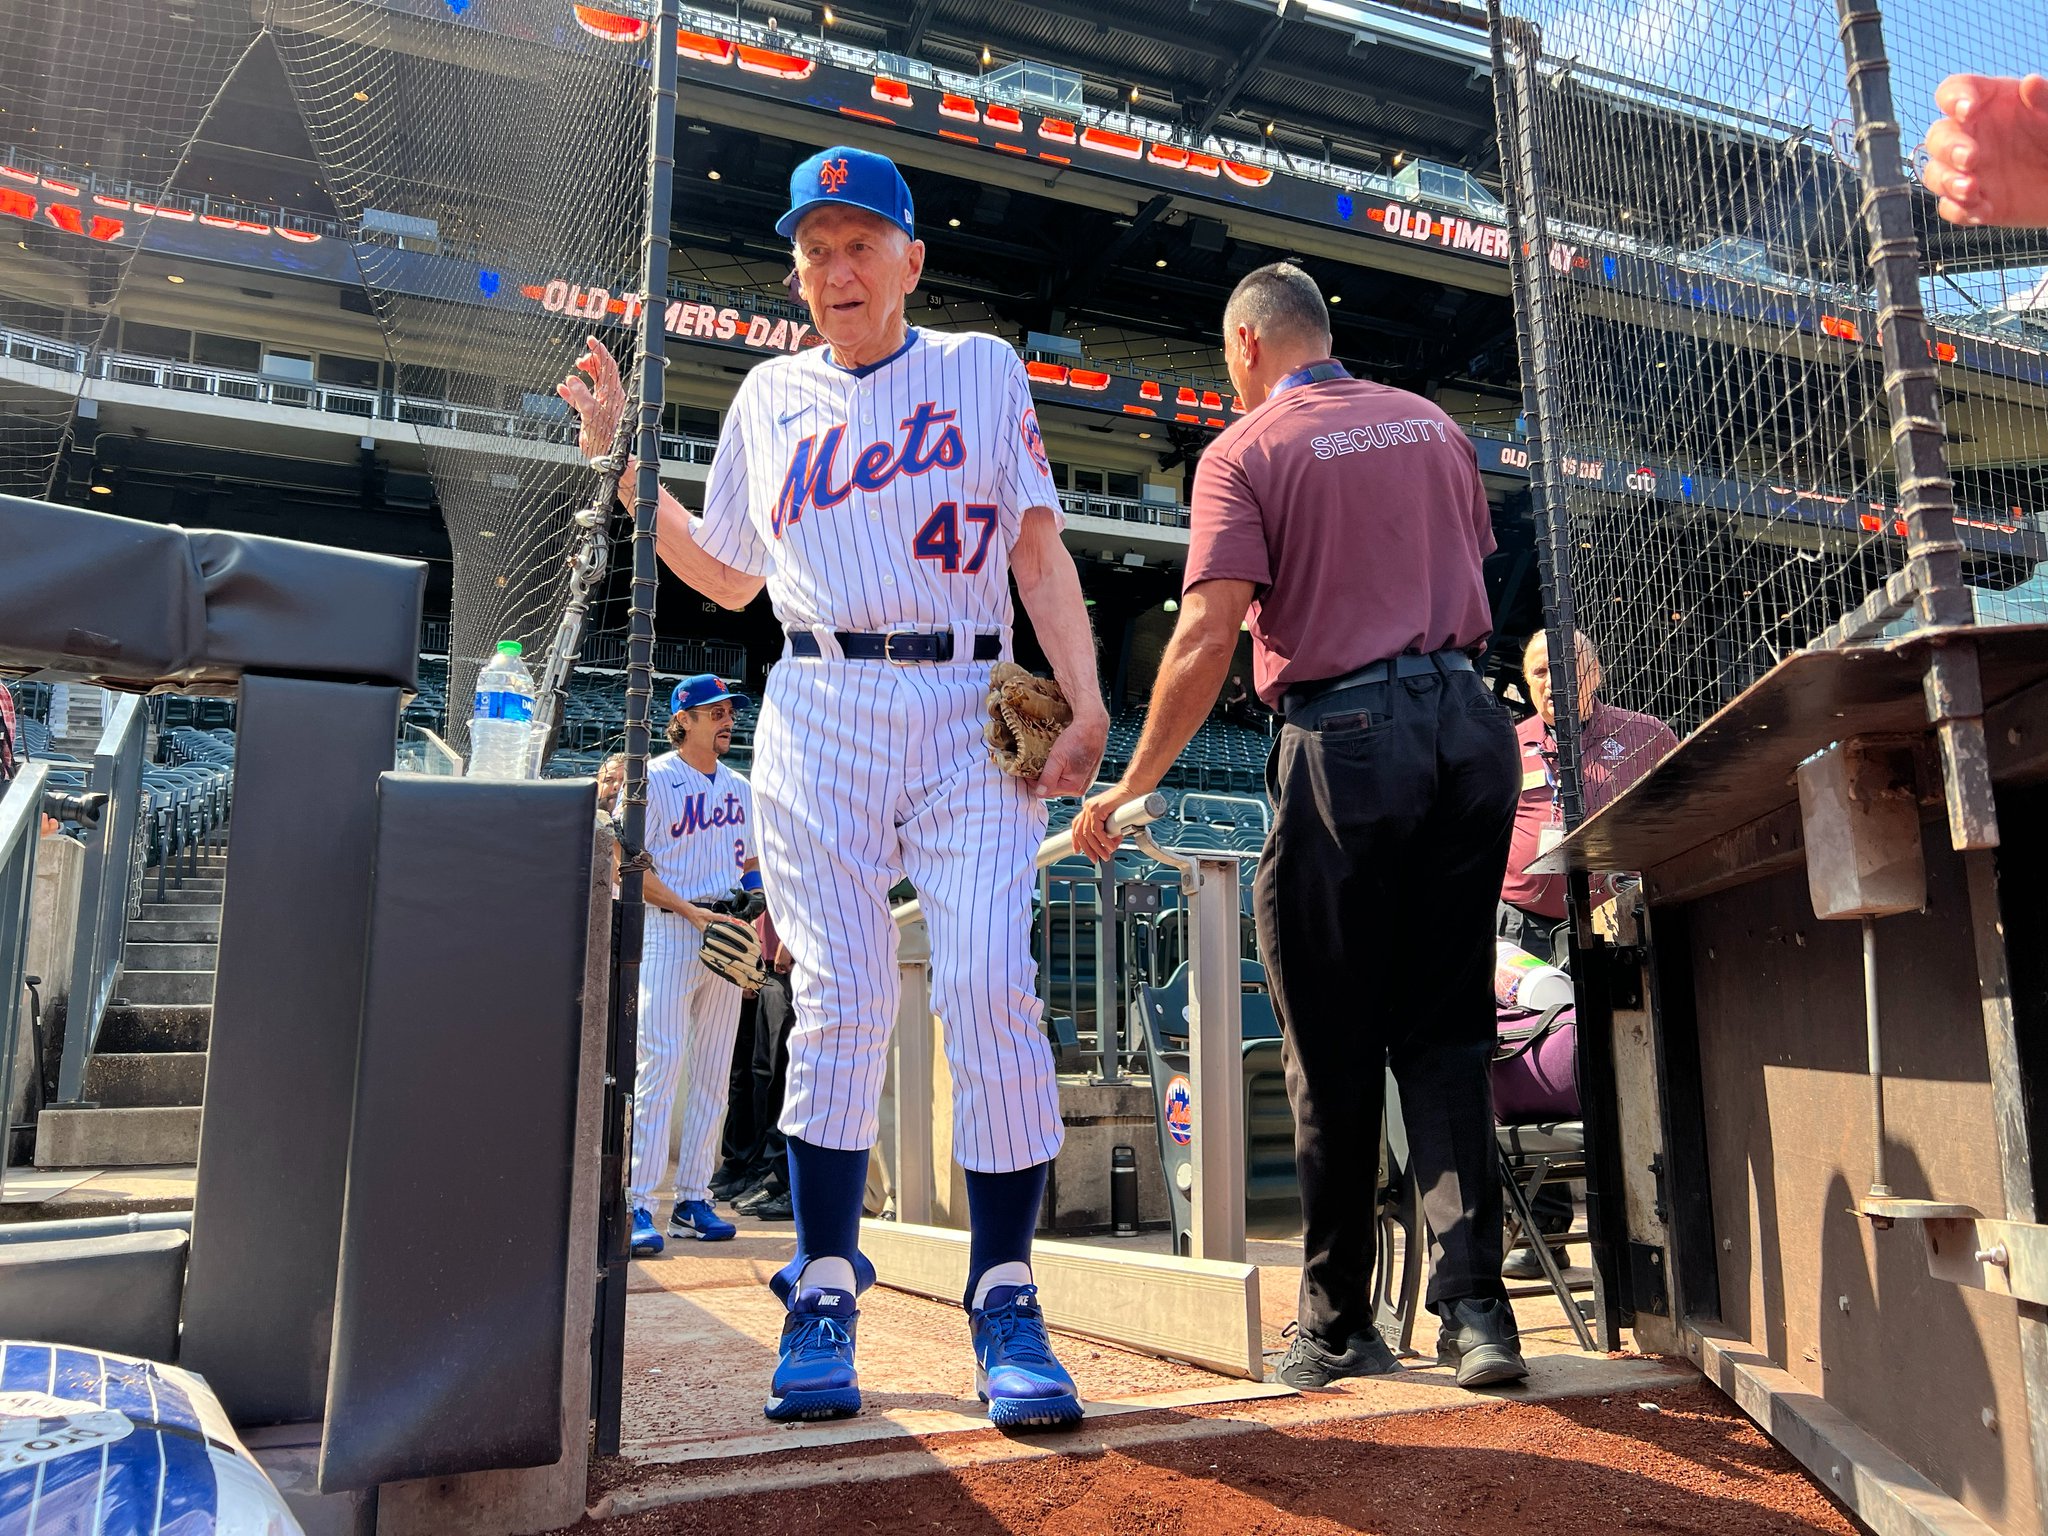 Turning back the clock: A look at the Mets' last Old-Timers' Day in